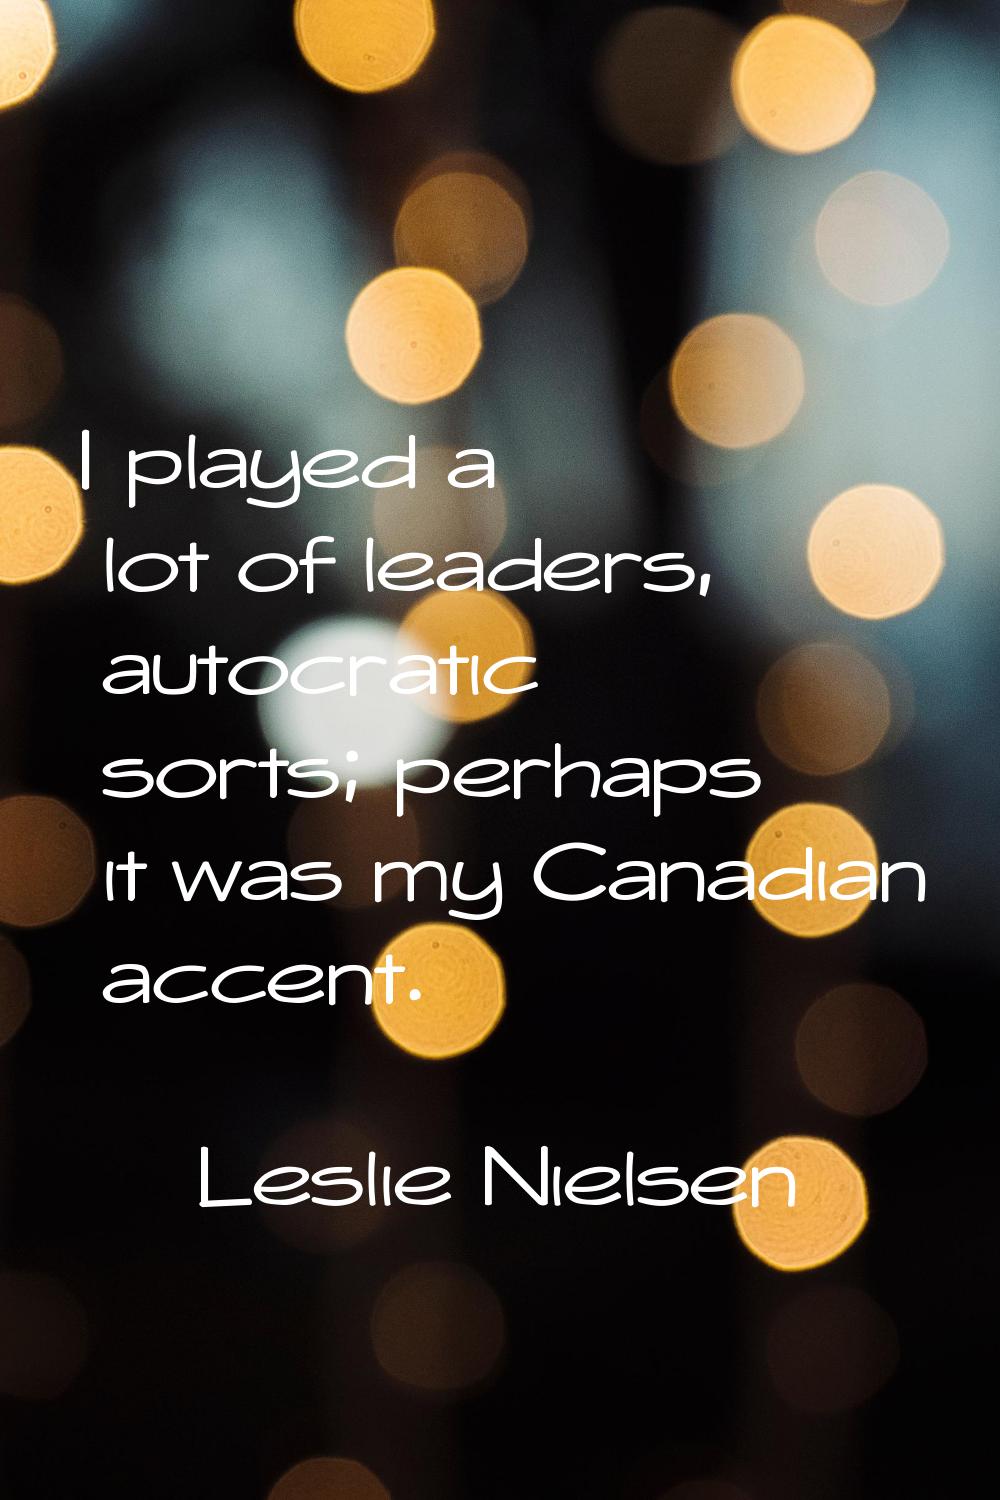 I played a lot of leaders, autocratic sorts; perhaps it was my Canadian accent.